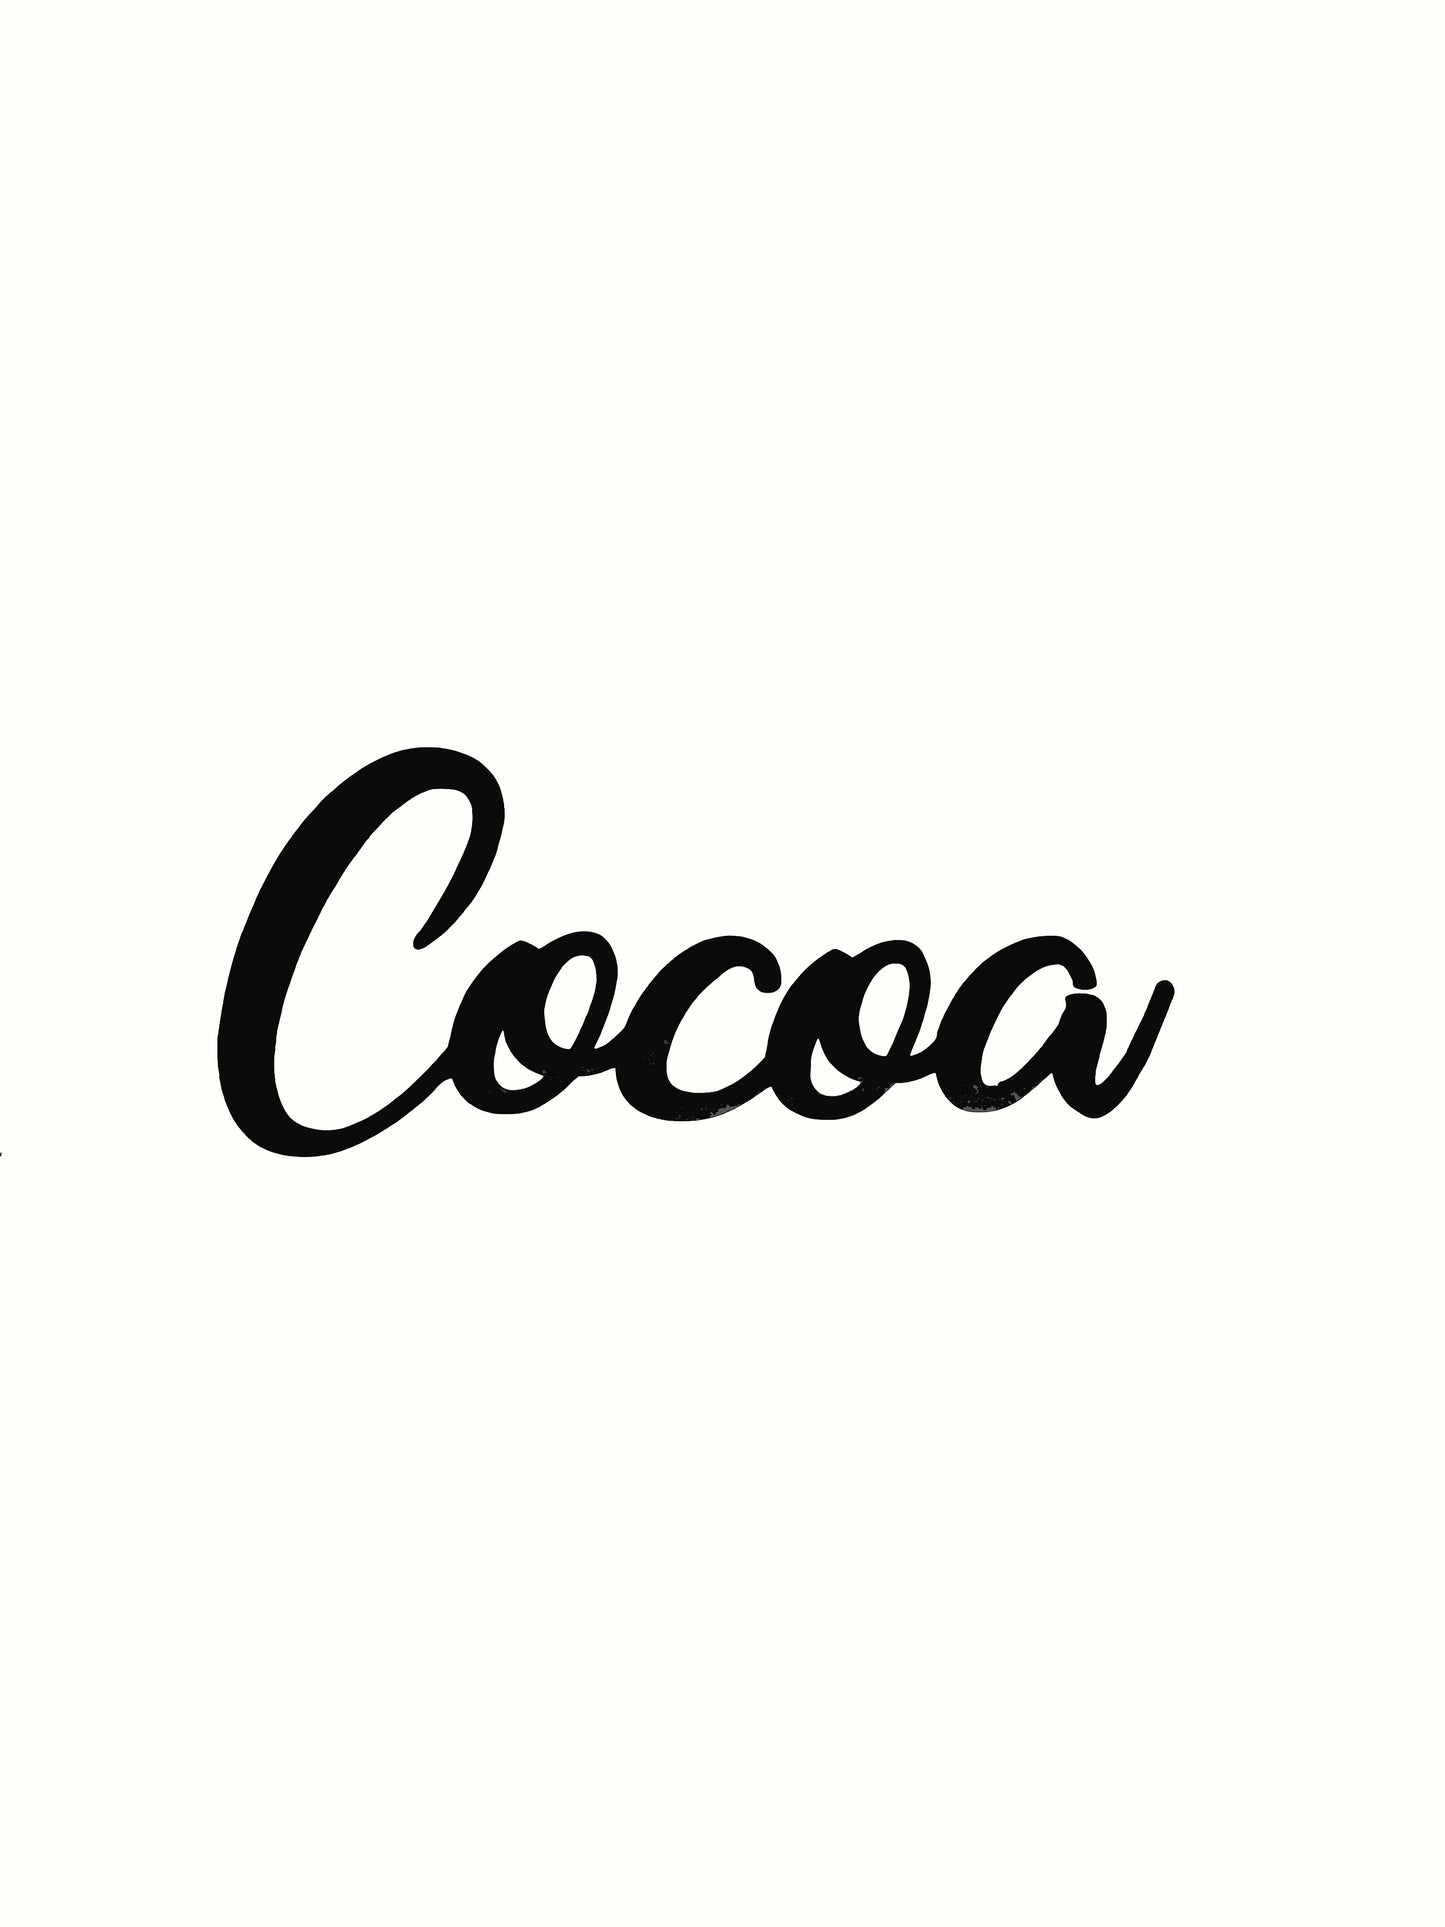 Cocoa Kitchen Decal - Vinyl Sticker Decal